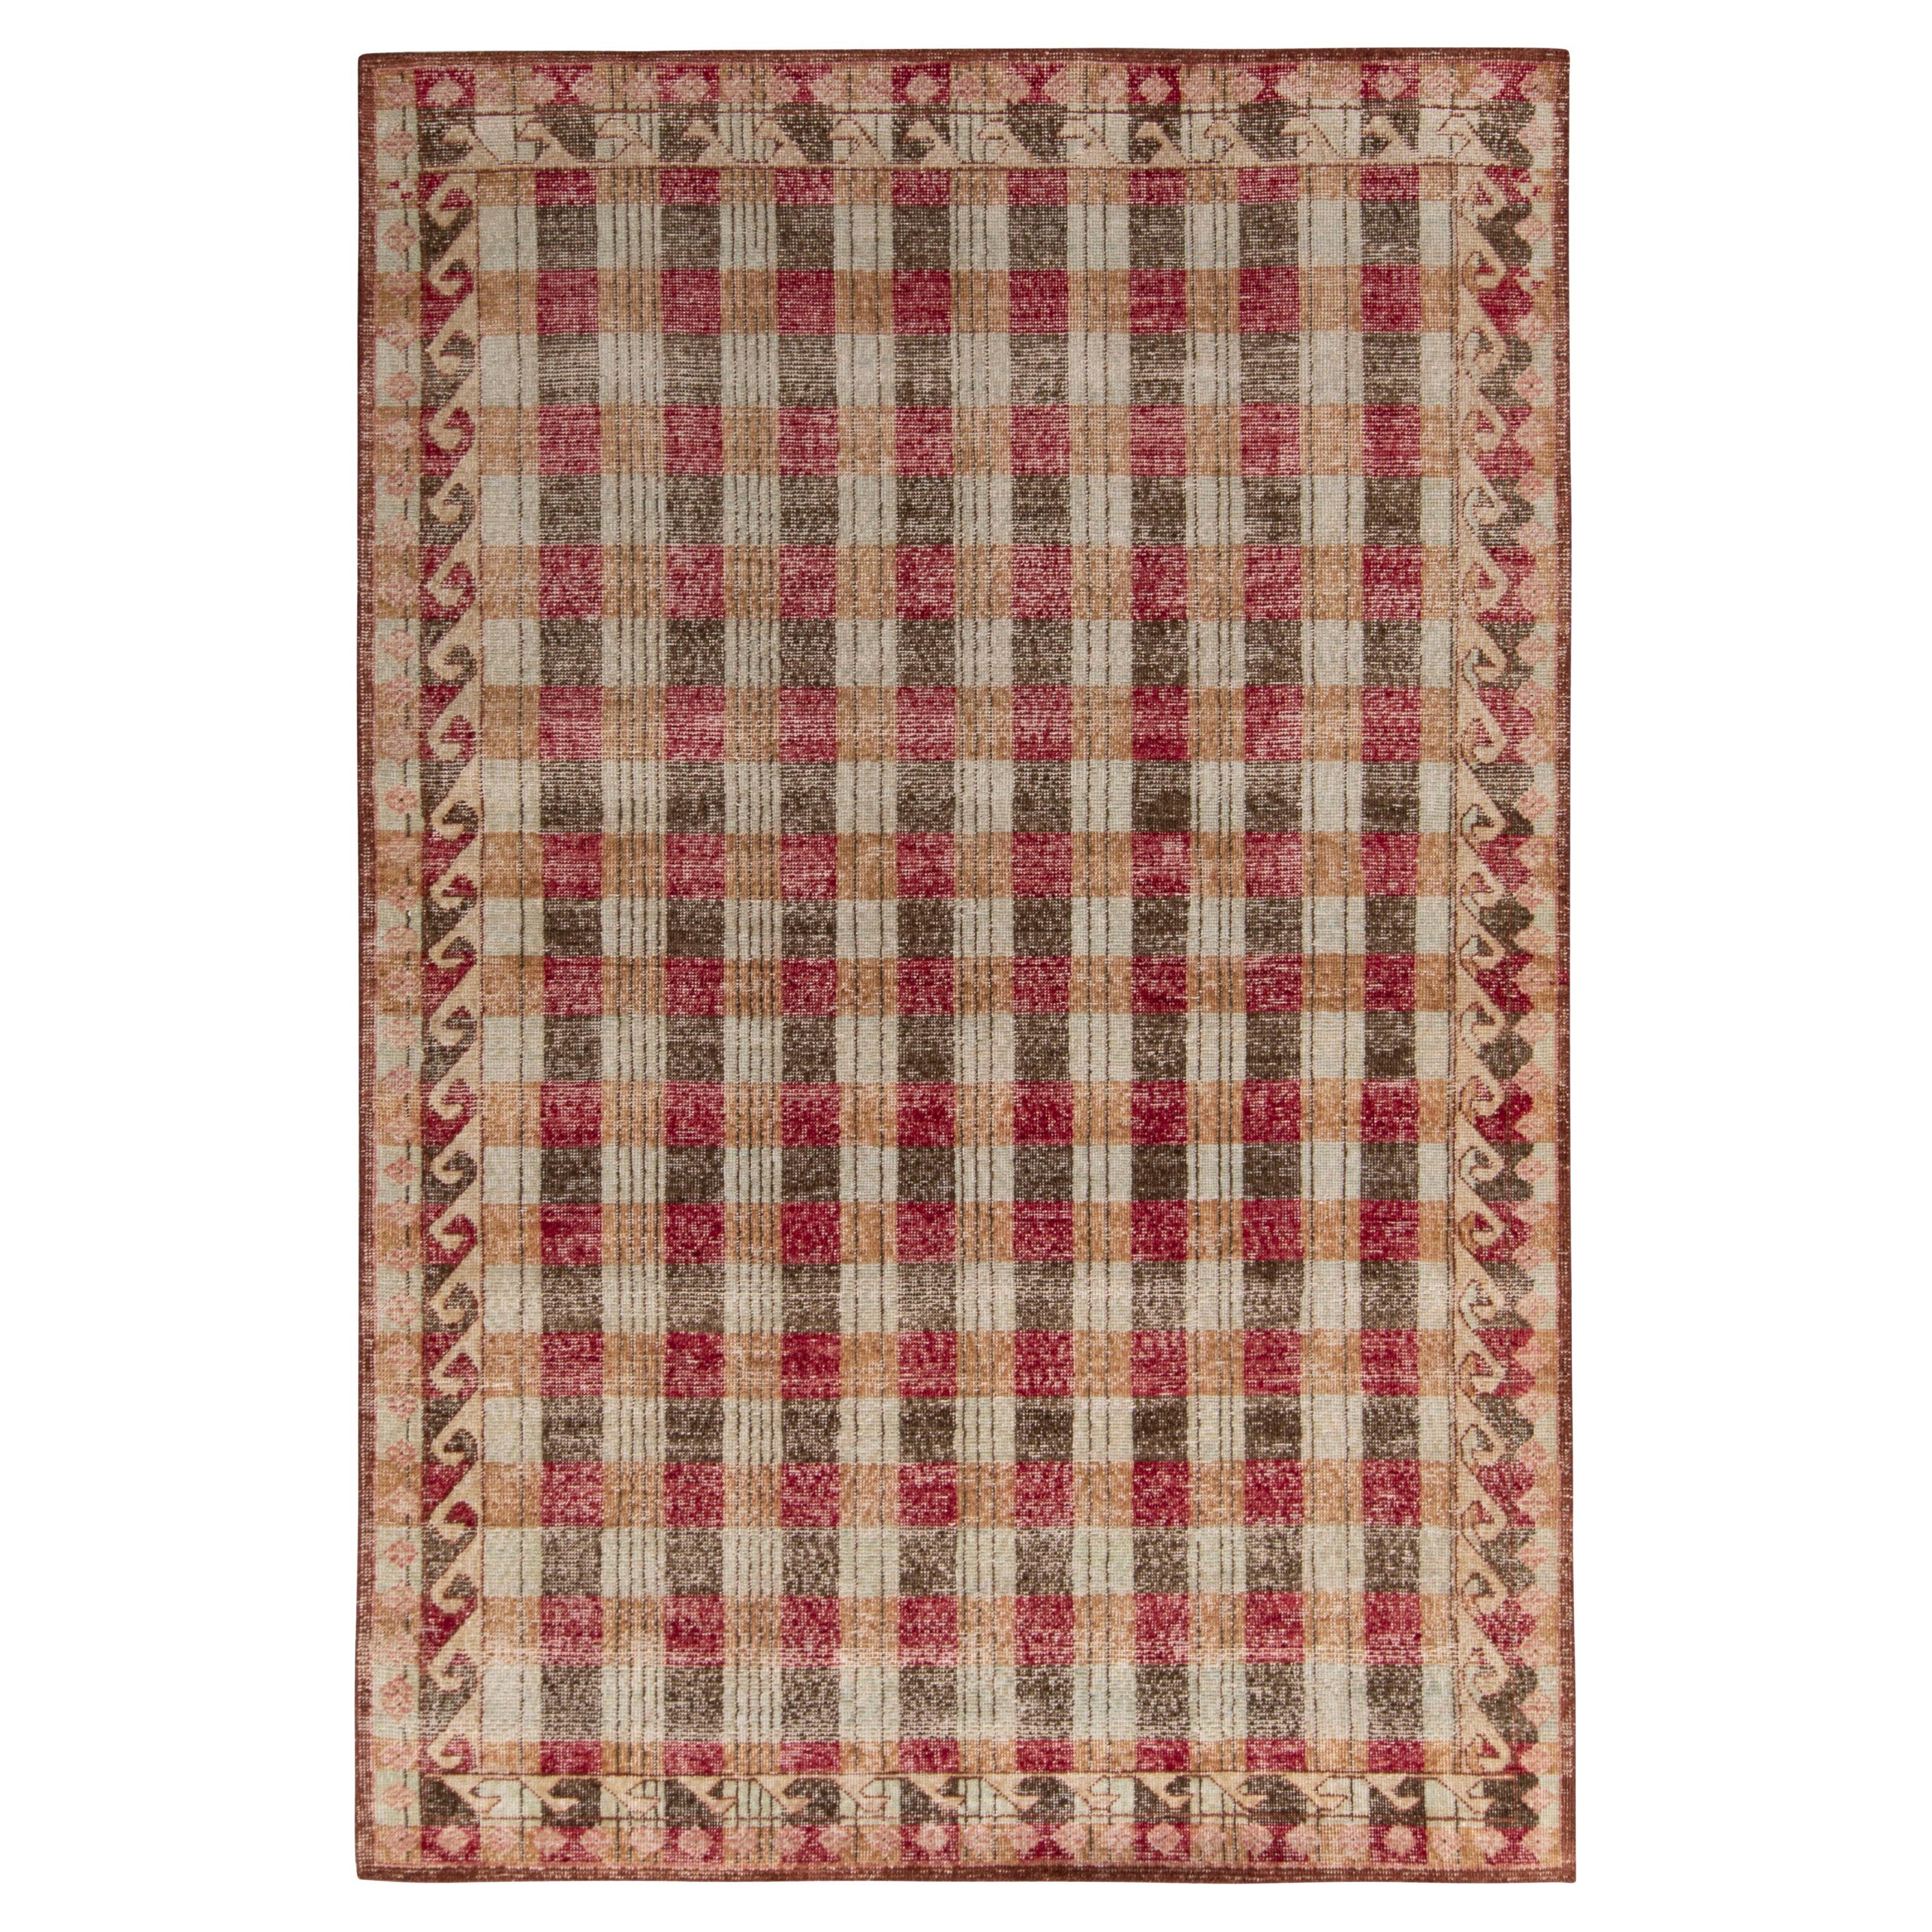 Rug & Kilim's Distressed Classic Style Teppich in Beige-Braun, rotes geometrisches Muster im Angebot